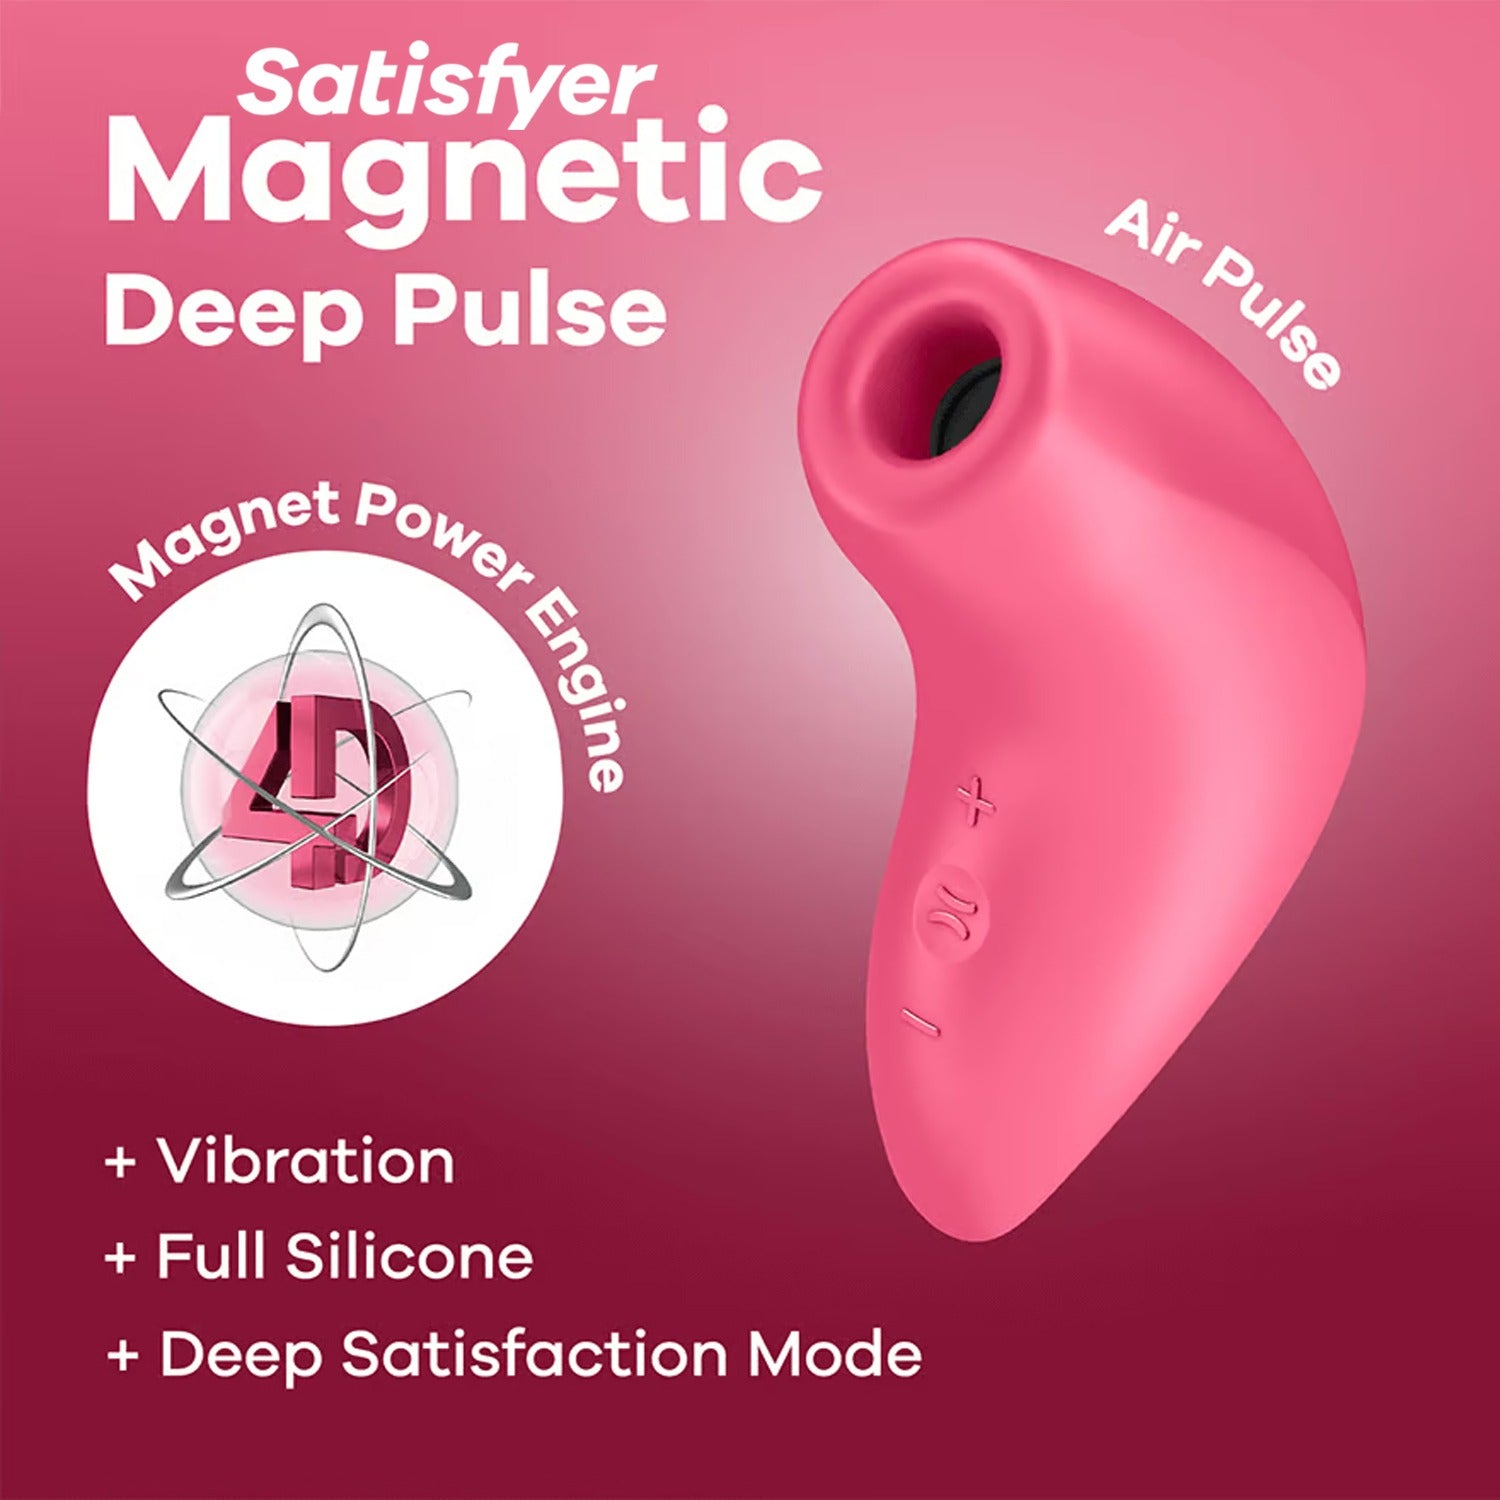 Satisfyer logo, Product name: Magnetic Deep Pulse, below is are feature icons for: Magnetic Power Engine; Vibration; Full silicone; Deep satisfaction Mode, and beside is an image of the Air Pulse Vibrator.